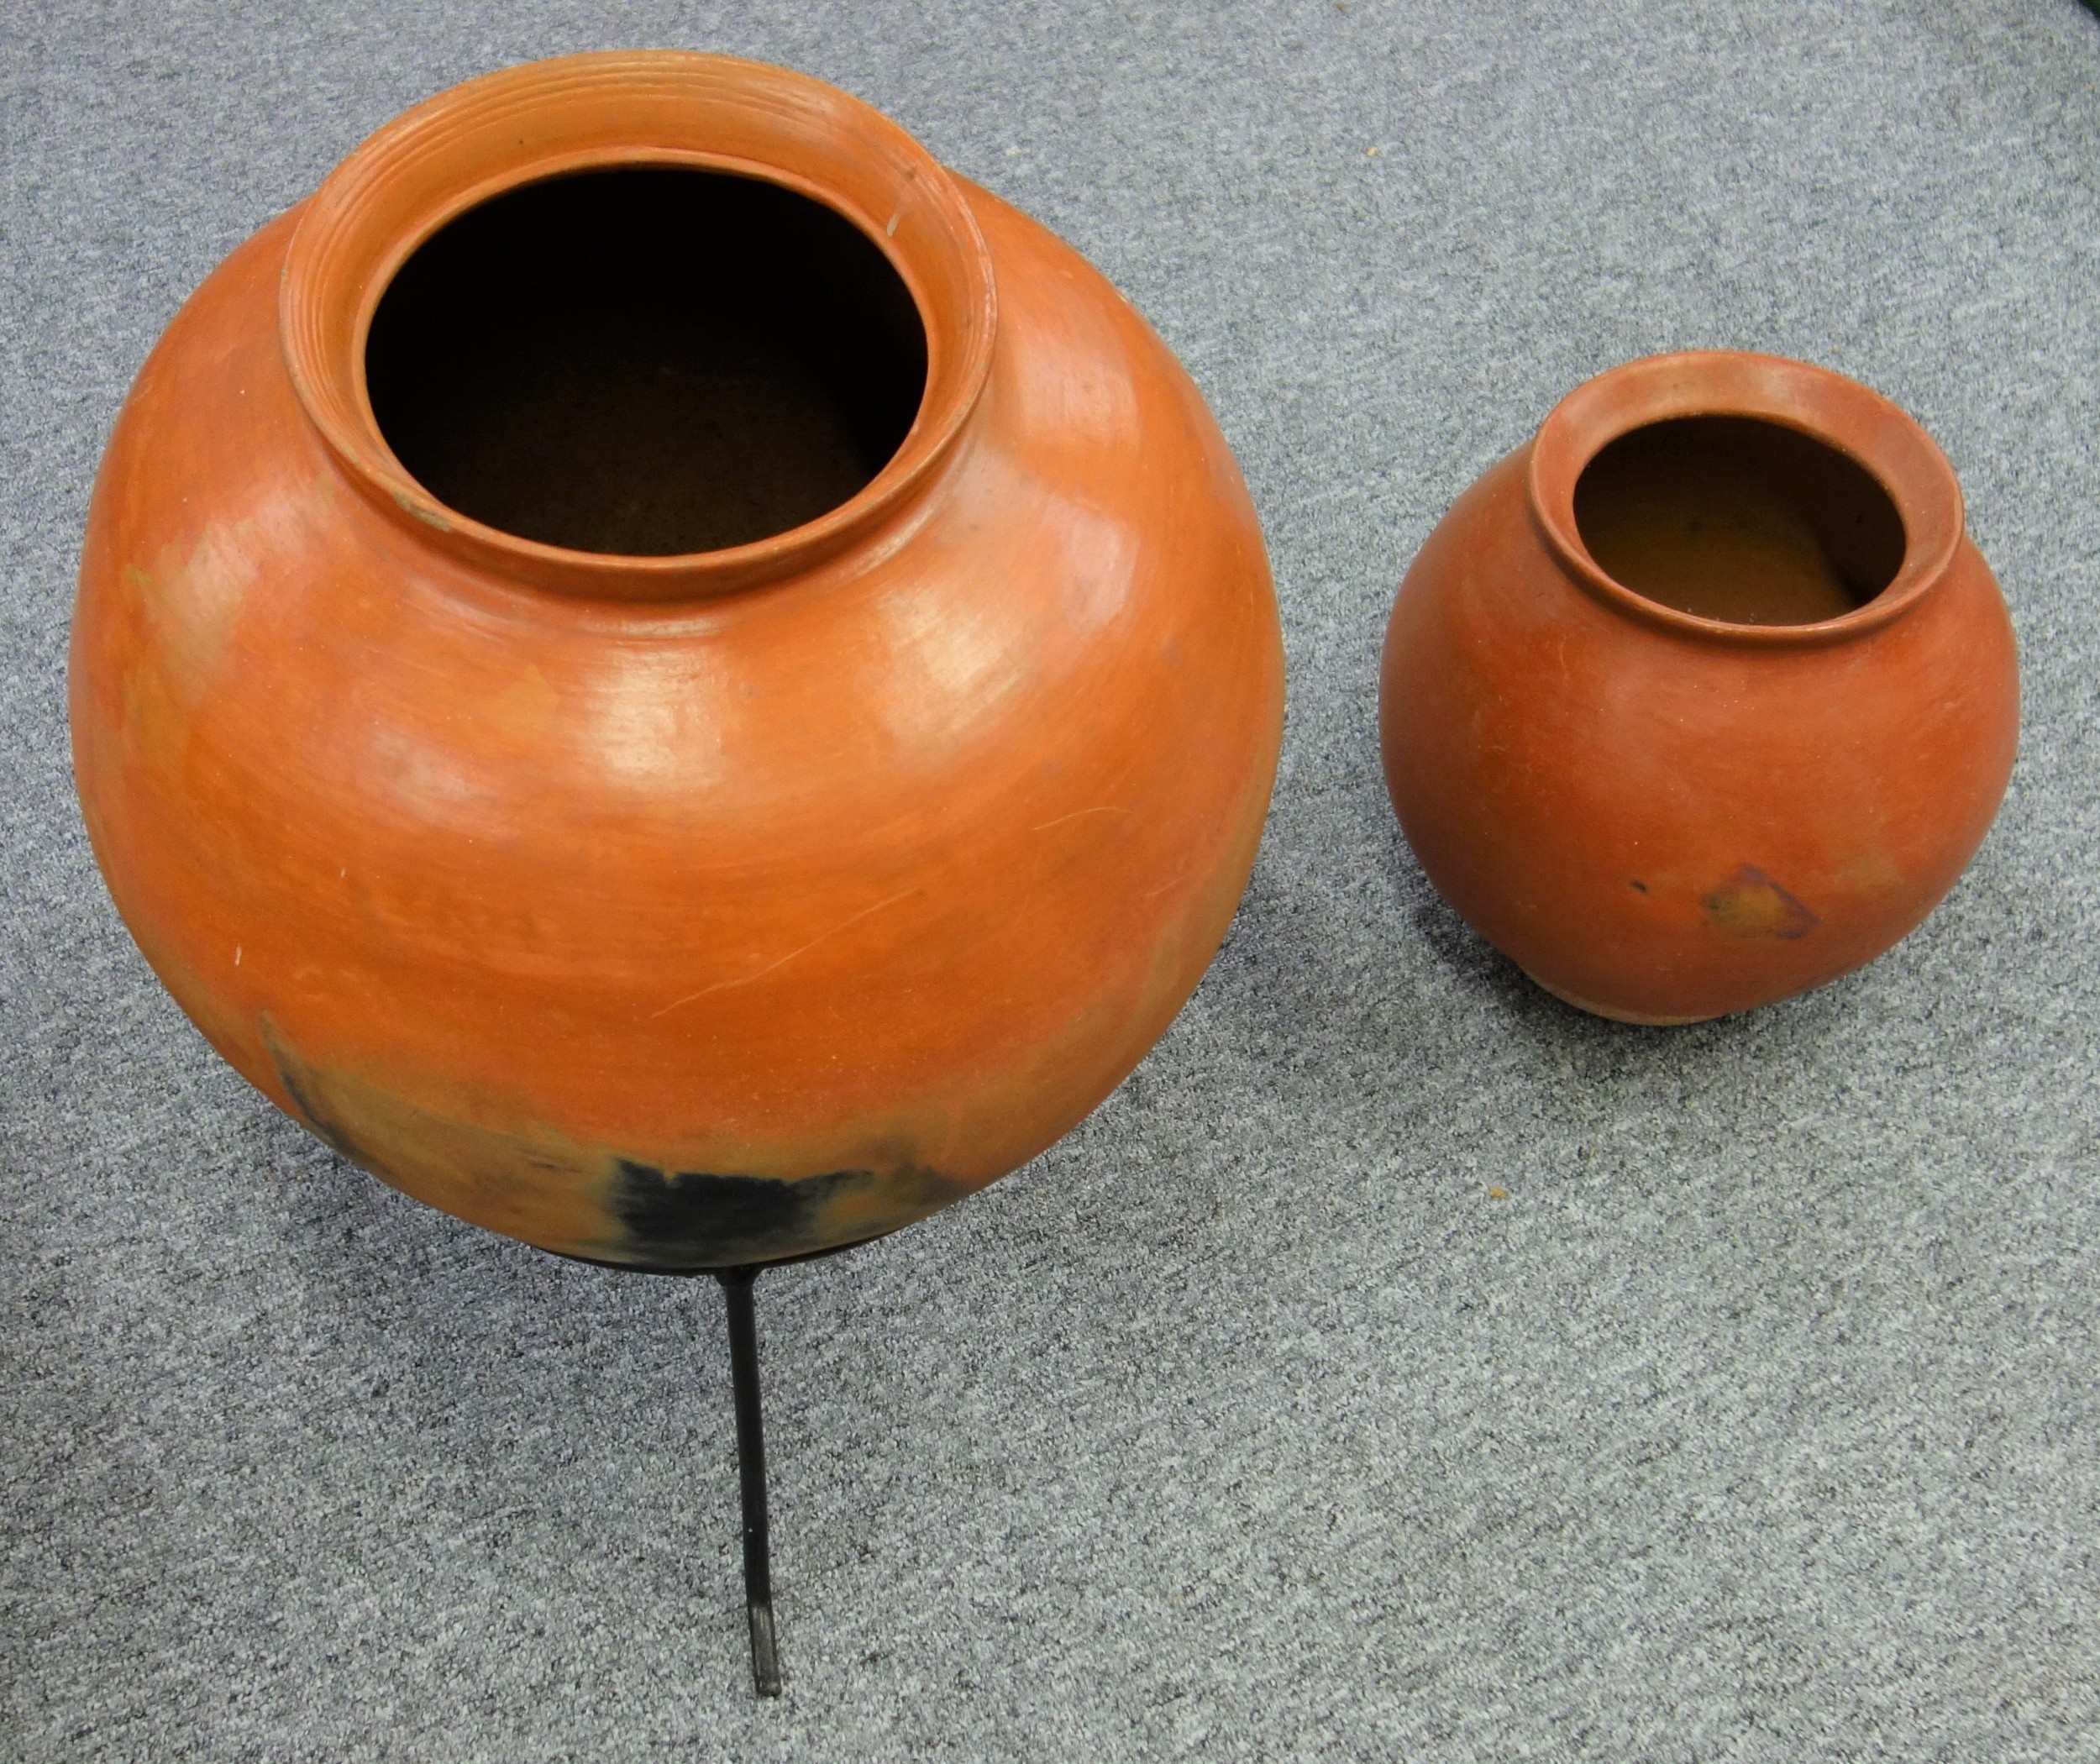 Large African terracotta cooking pot Dia. 48cm, H. 46cm, with a metal stand, and another similar pot - Bild 3 aus 4